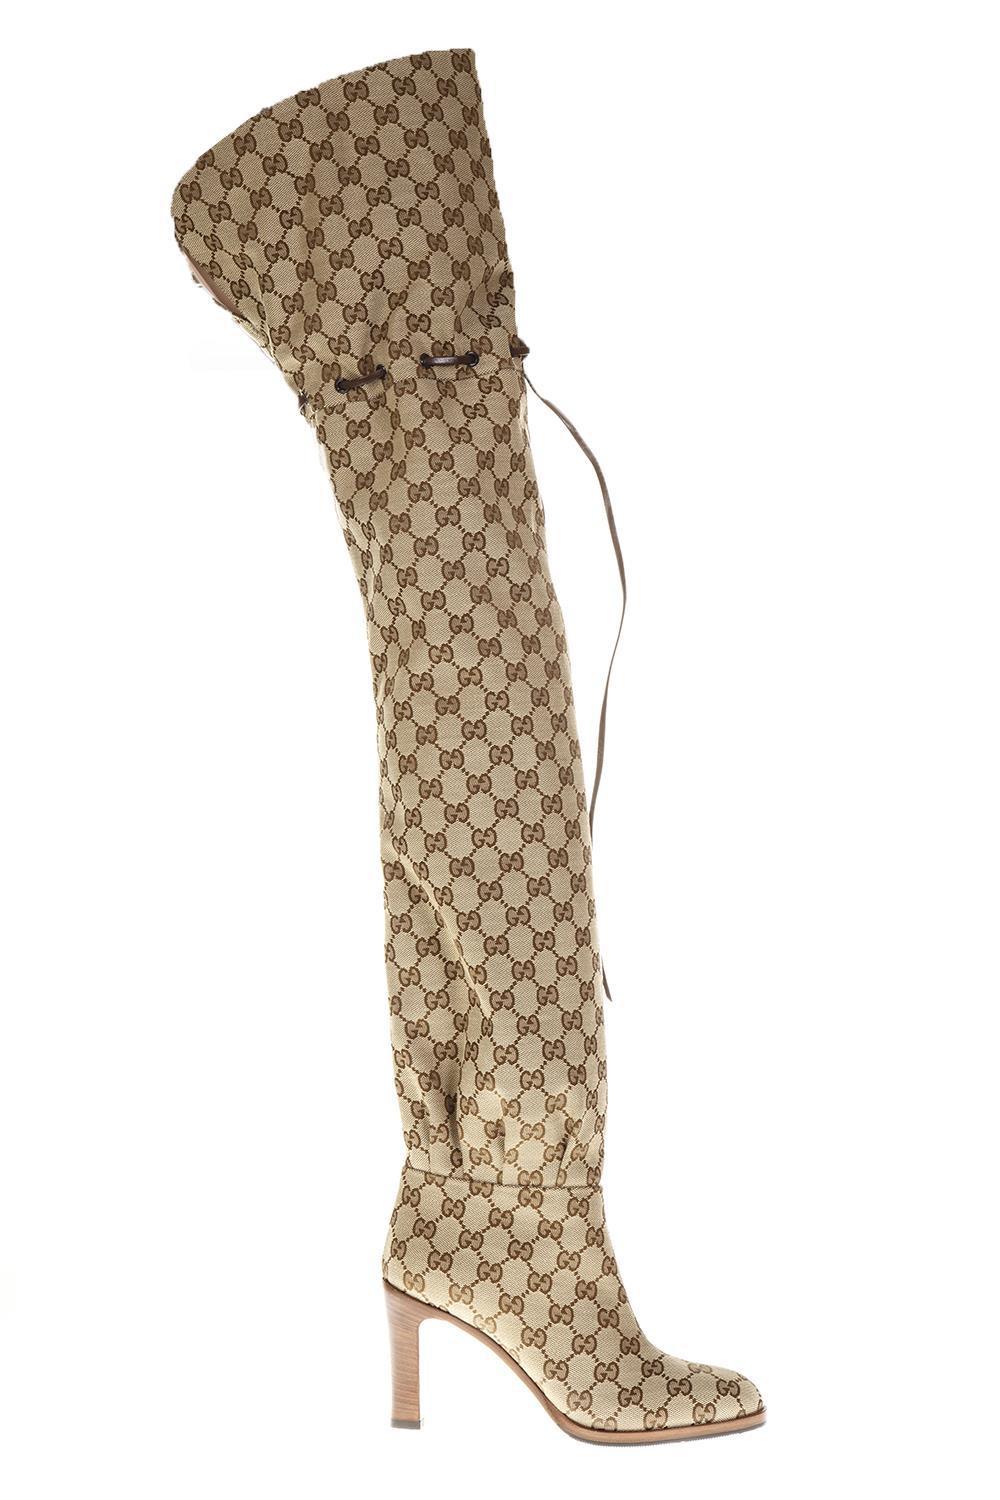 Gucci Original GG Canvas Over-the-knee Boot in Natural - Lyst